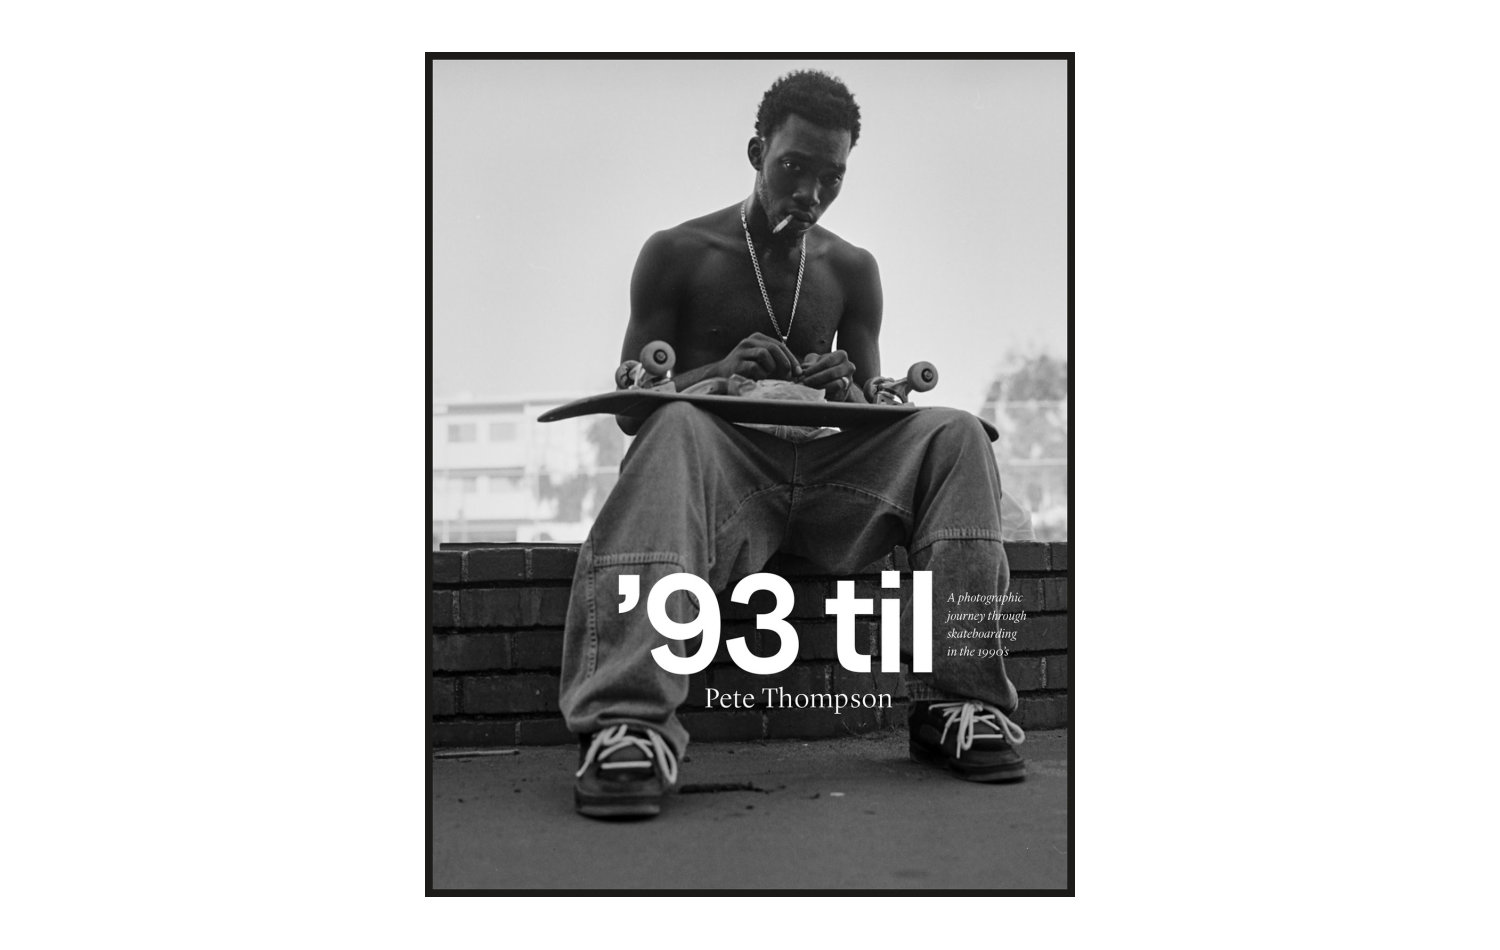 Goff Books 93 Til By Pete Thompson (978-1-951541-18-7)